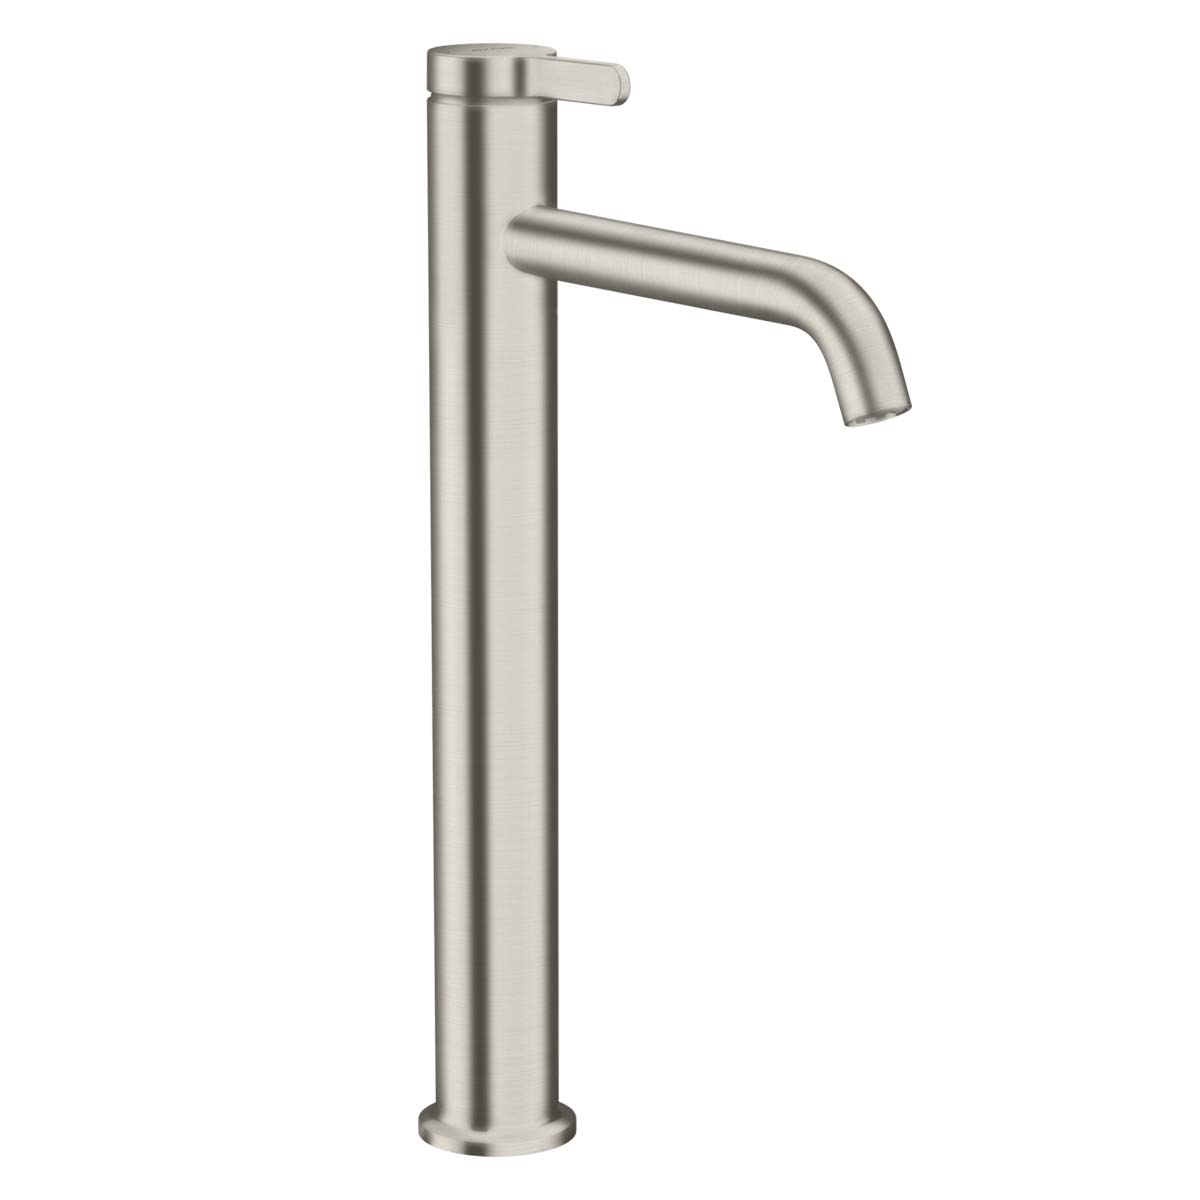 Axor One 260 Tall Basin Mixer Tap with Waste Stainless Steel Optic